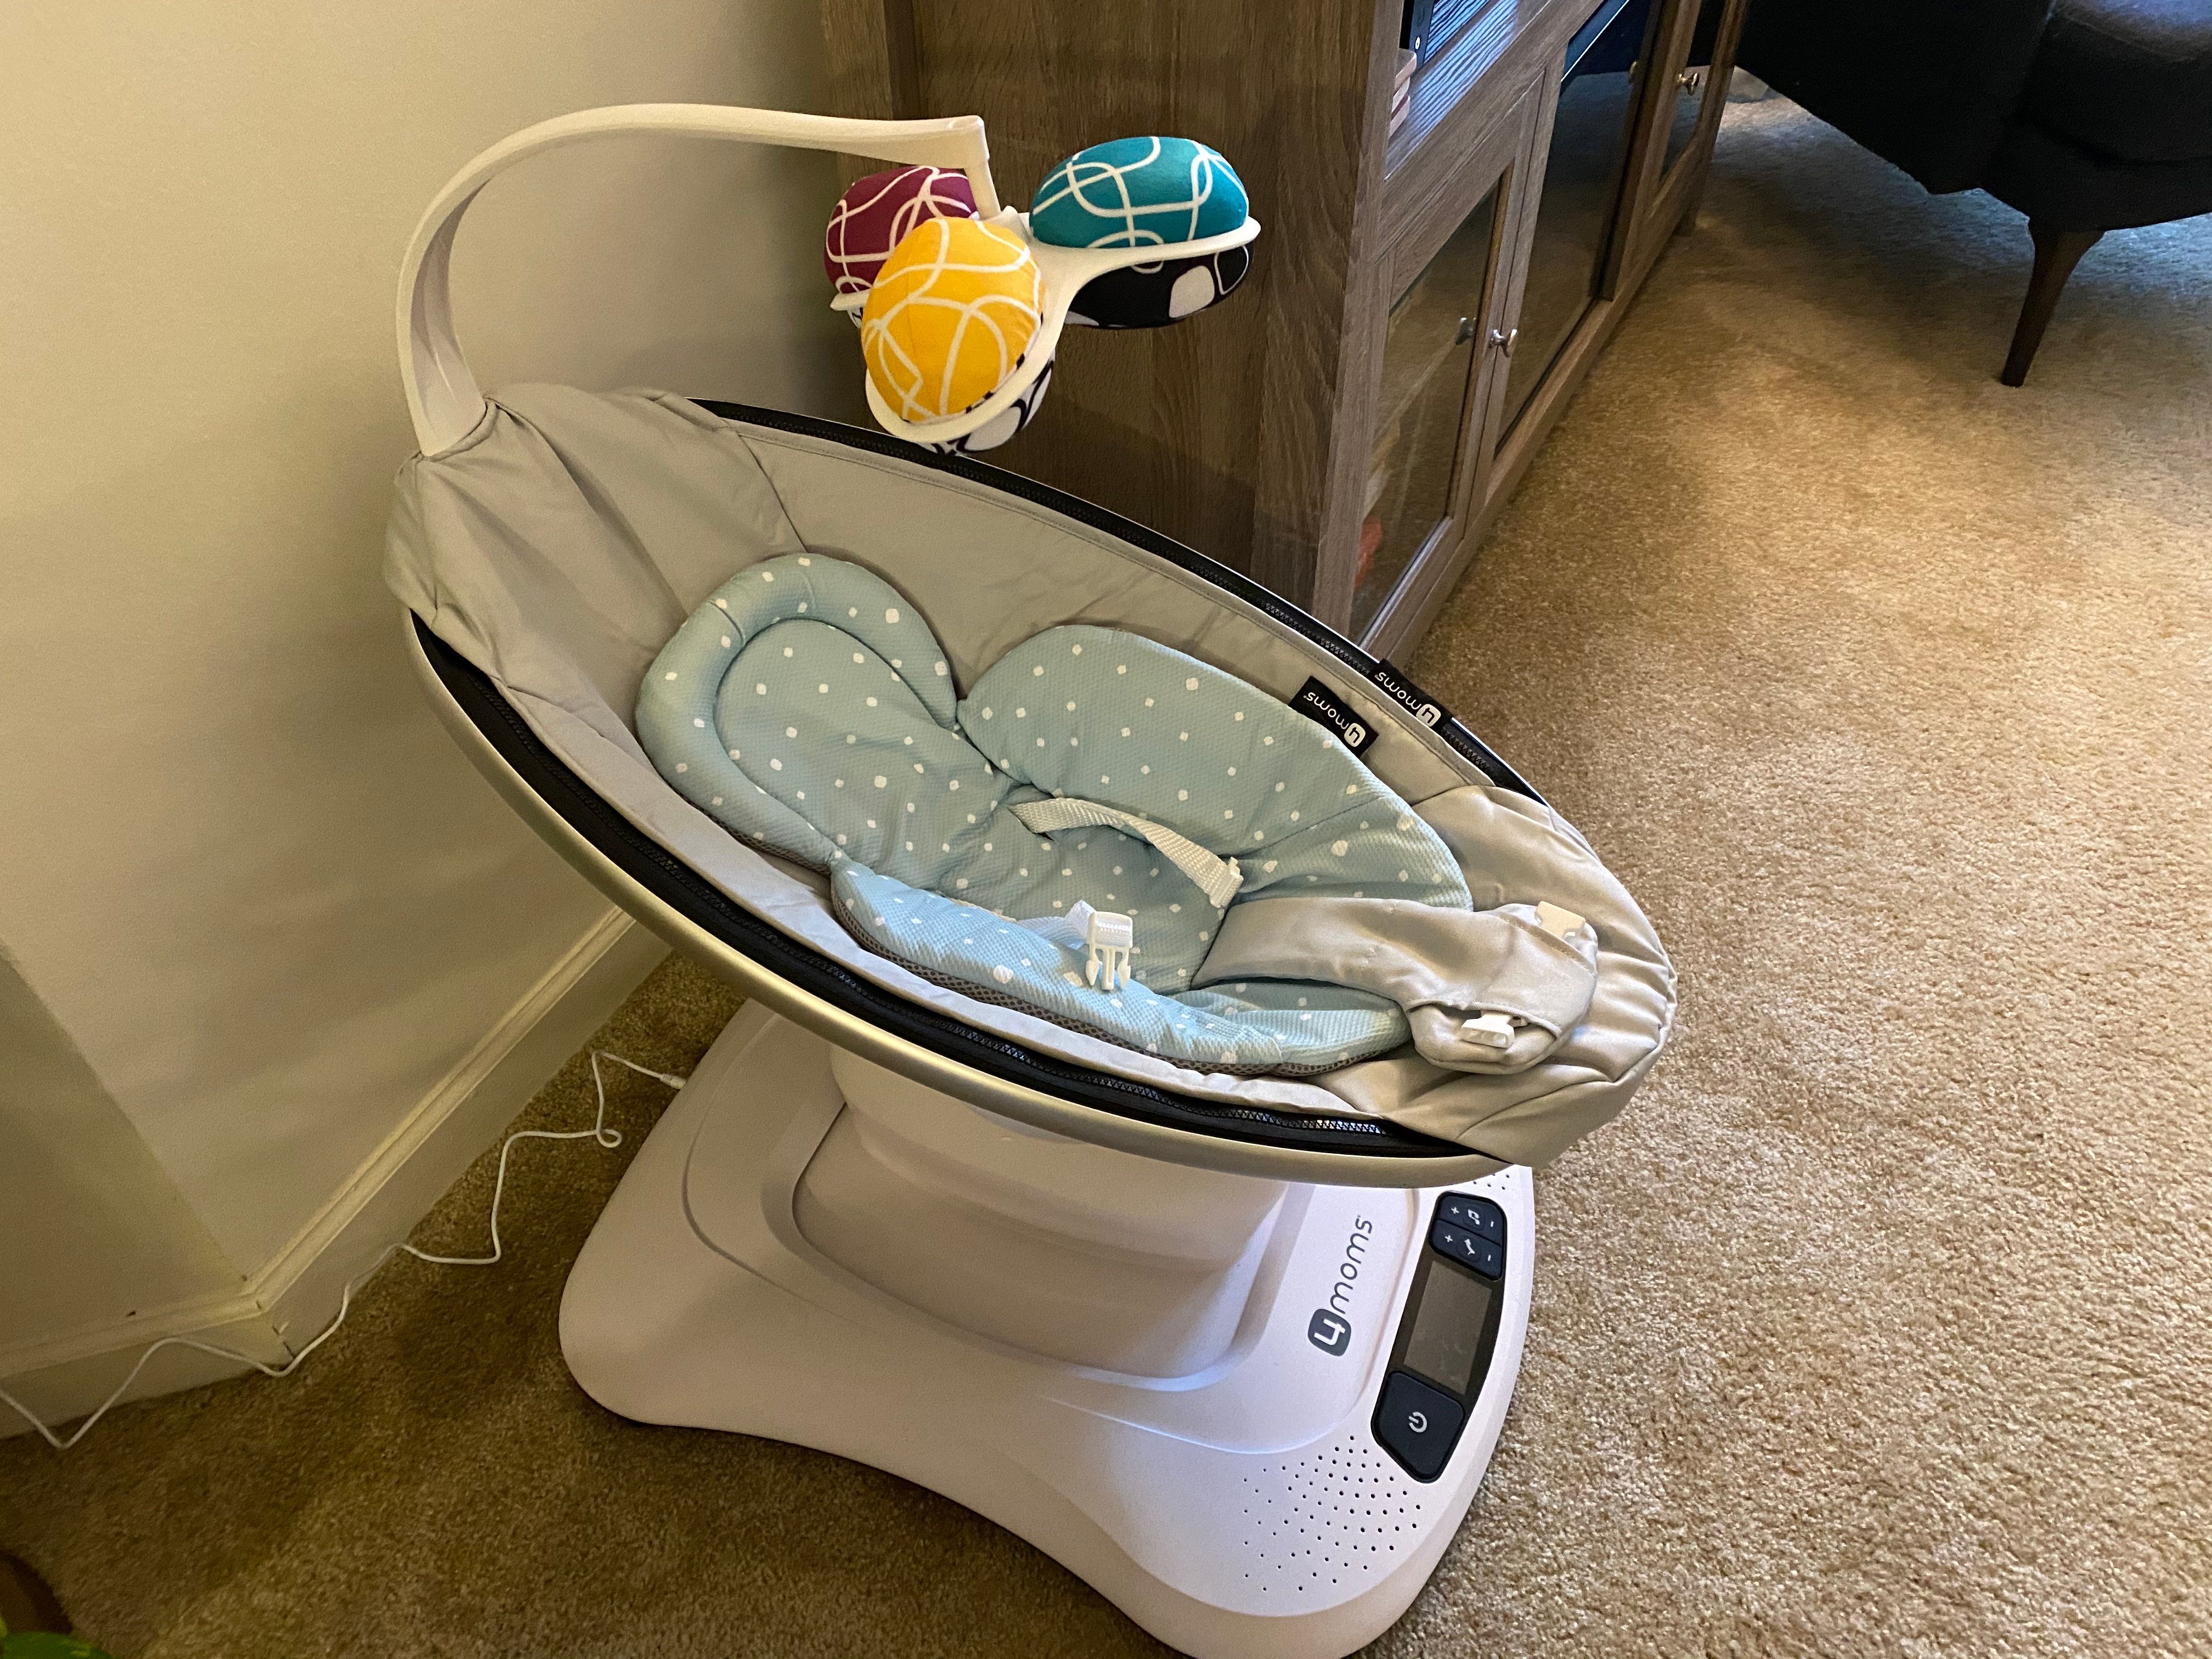 mamaRoo4 with infant insert and mobile plugged into the wall.